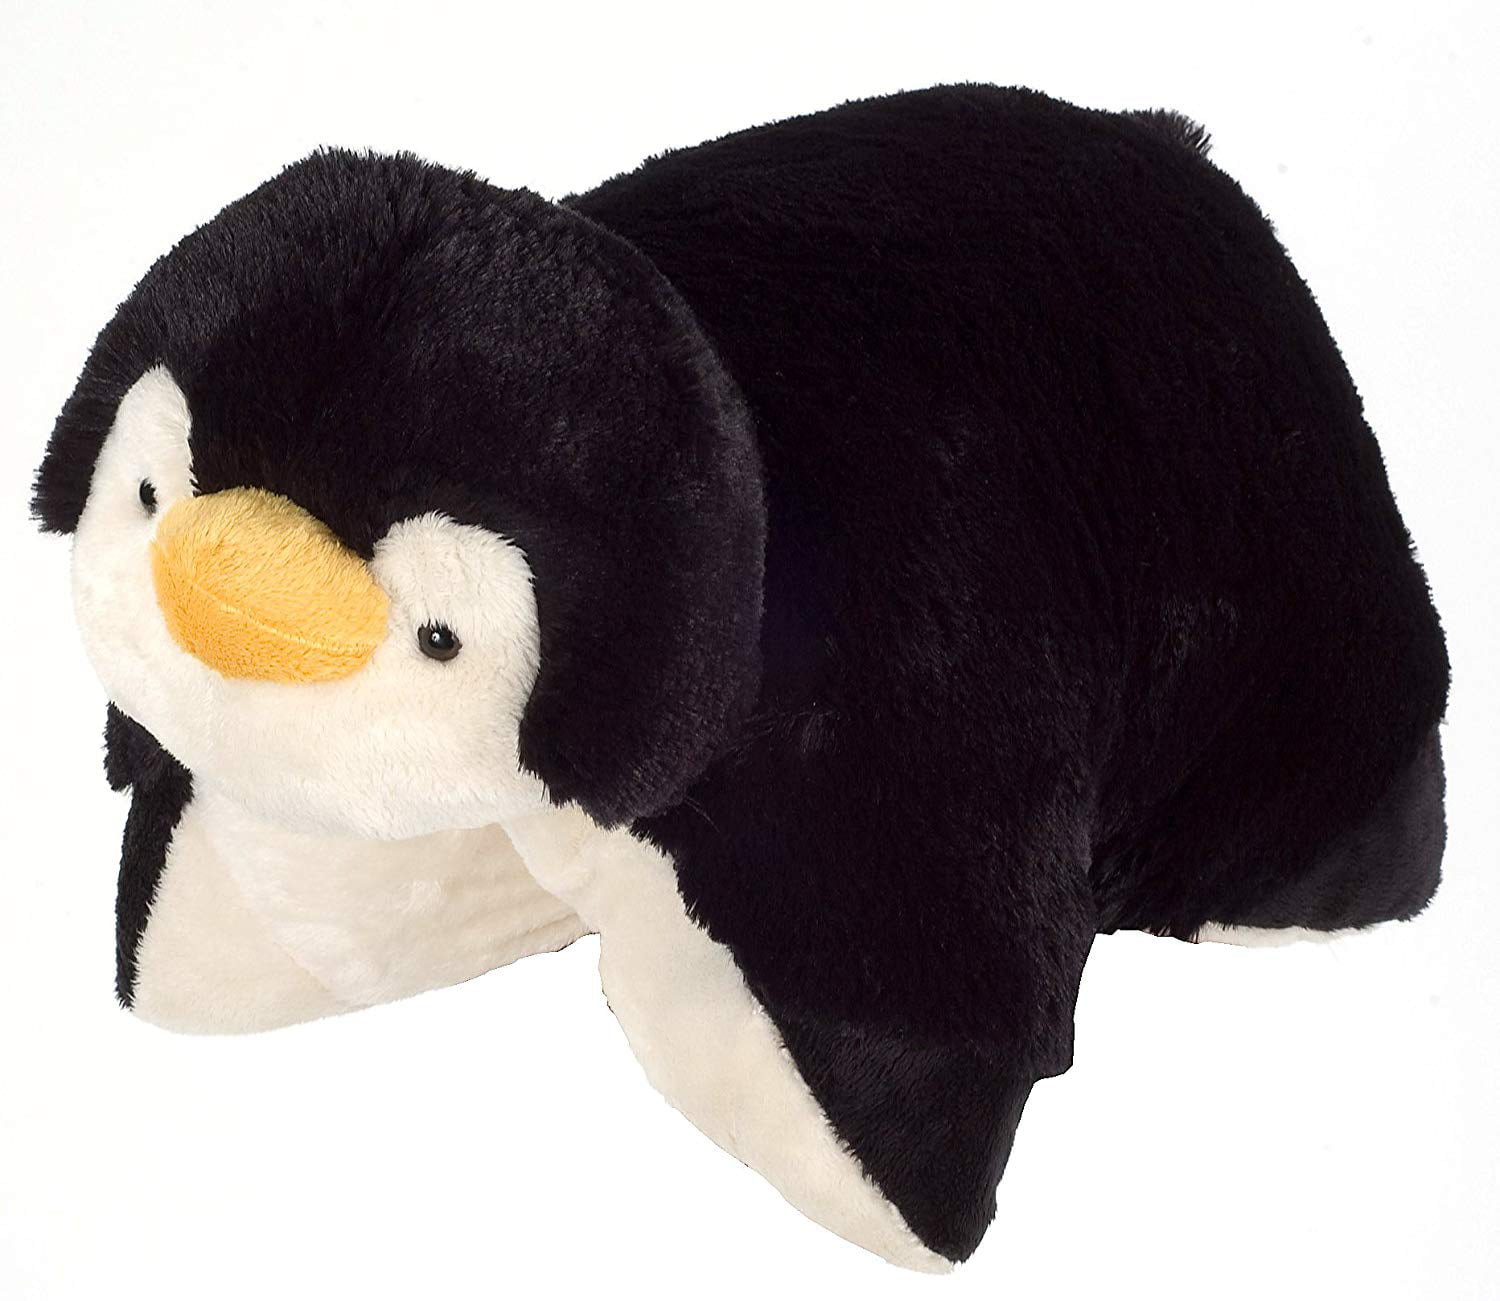 pillow pets for kids